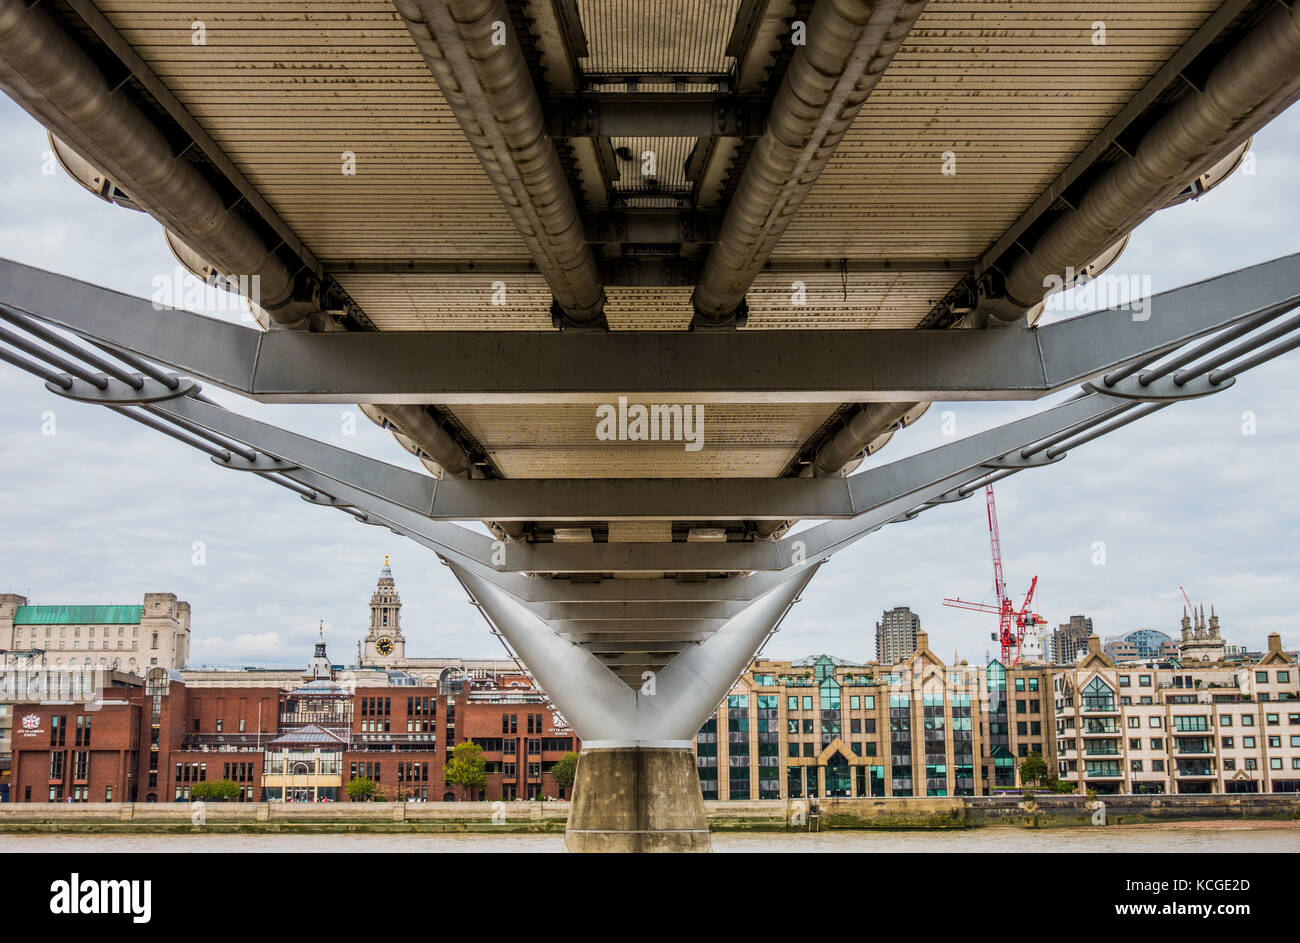 Construction and architecture on show via the underside of the Millennium Bridge, a pedestrian walkway across the River Thames in London, England, UK. Stock Photo